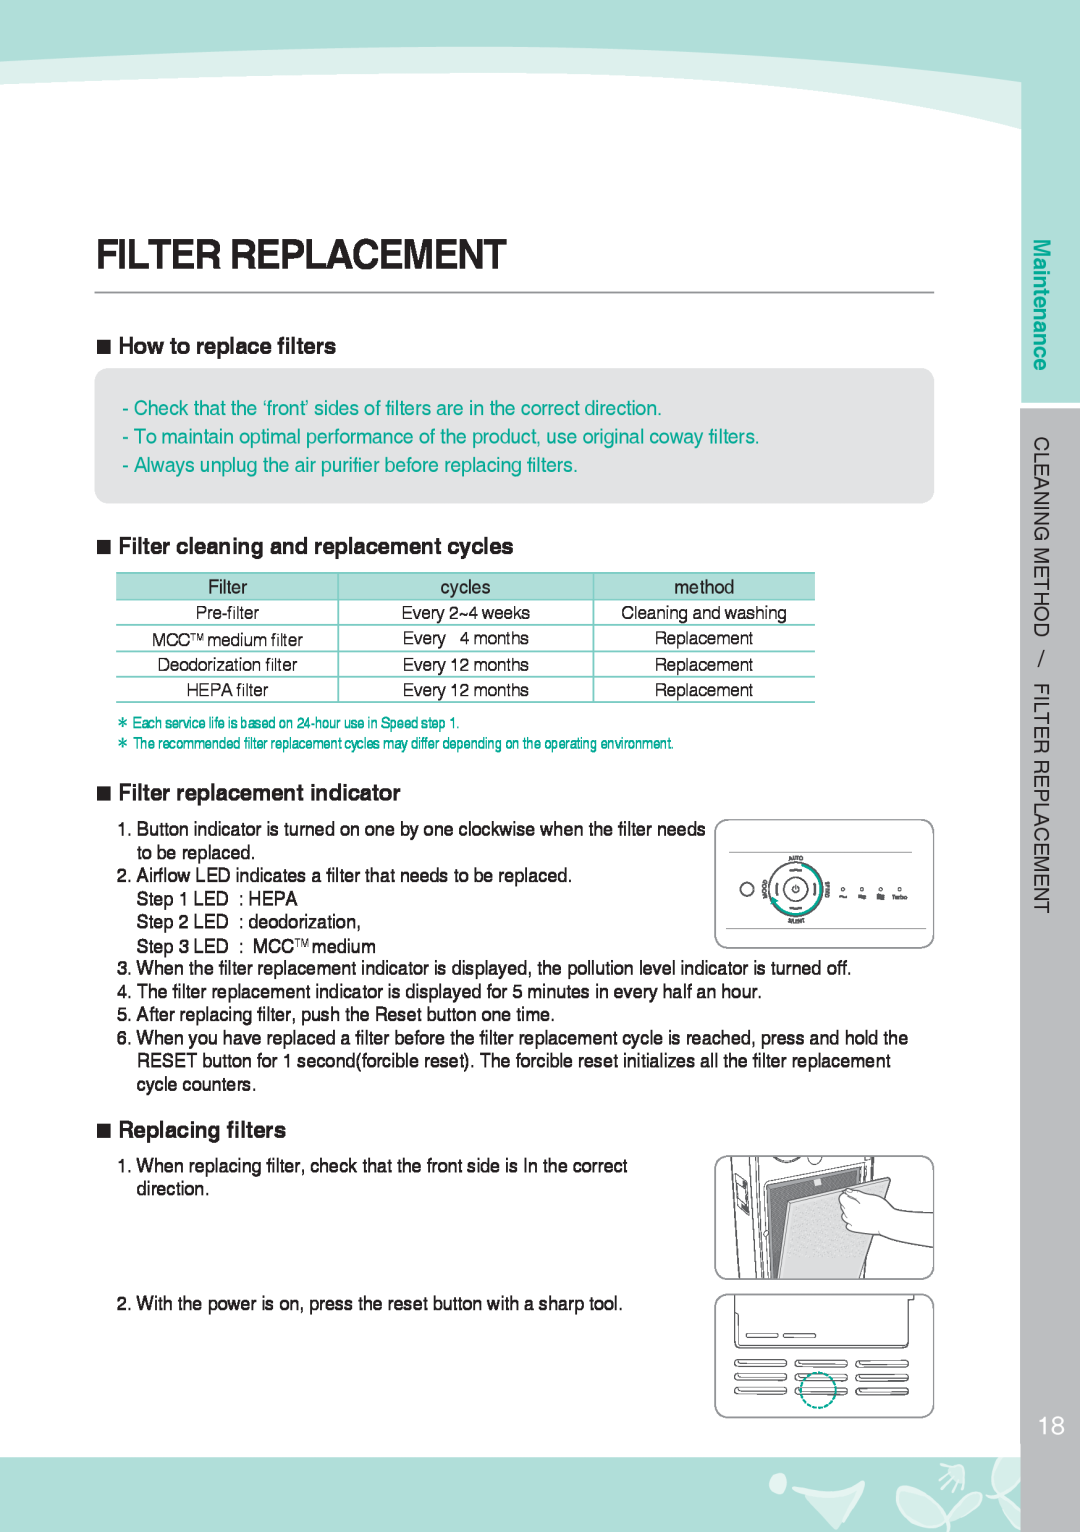 Coway AP-1008DH Filter Replacement, How to replace filters, Filter cleaning and replacement cycles, Replacing filters 